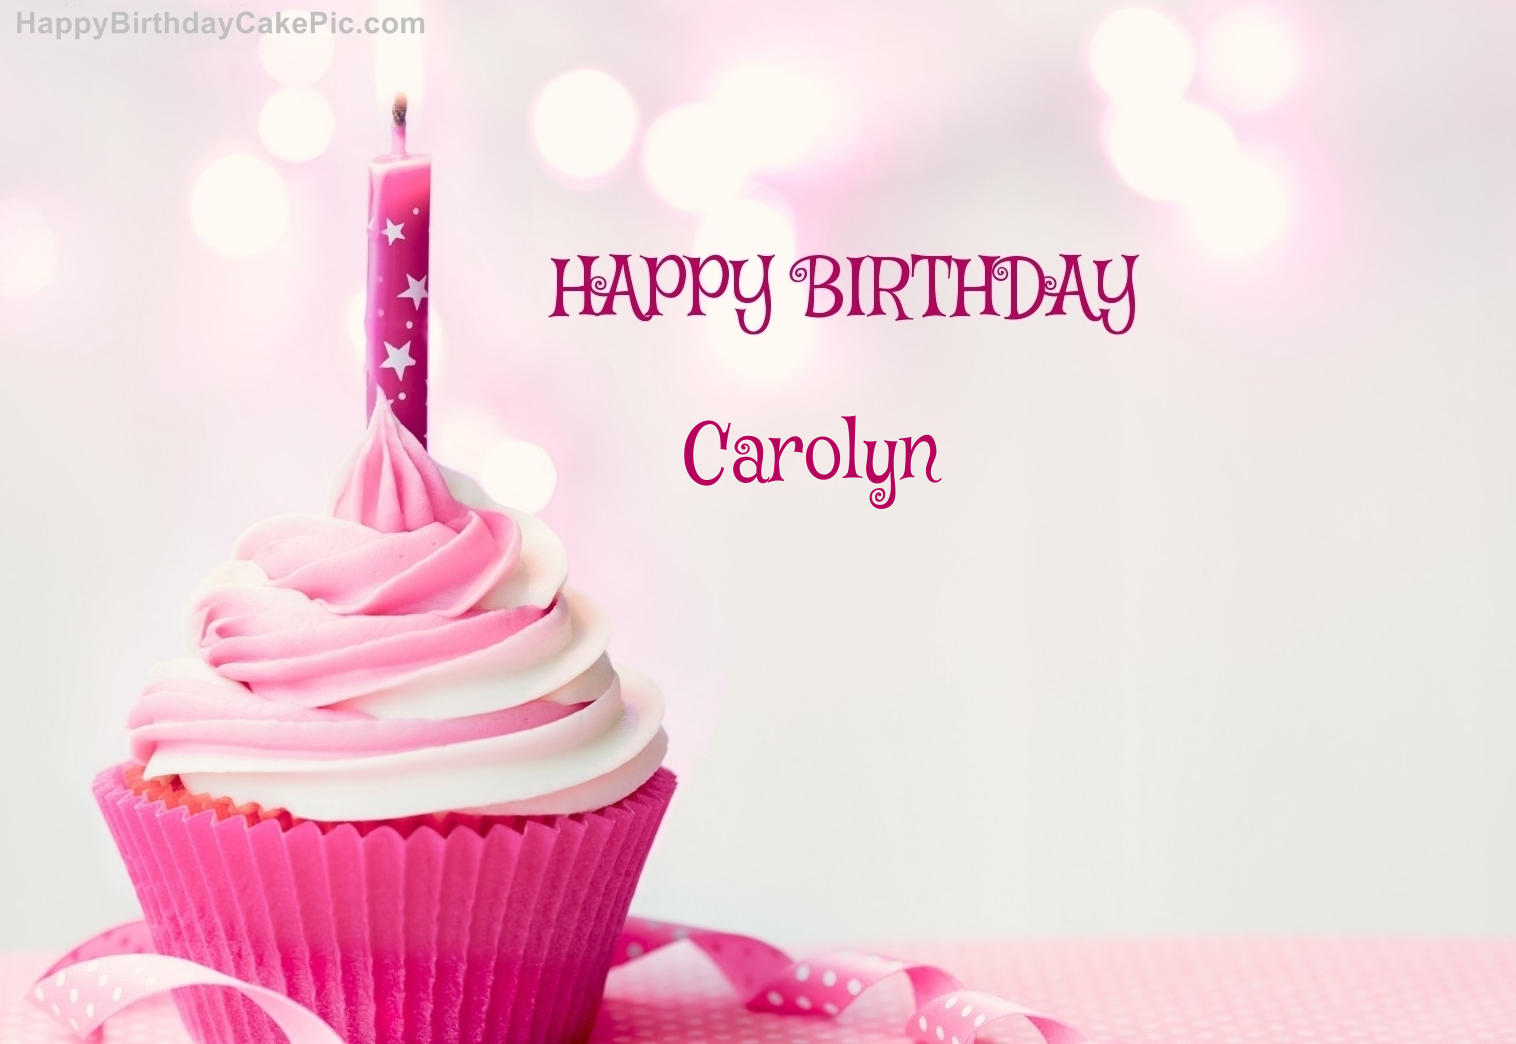 Image result for birthday cupcake carolyn image